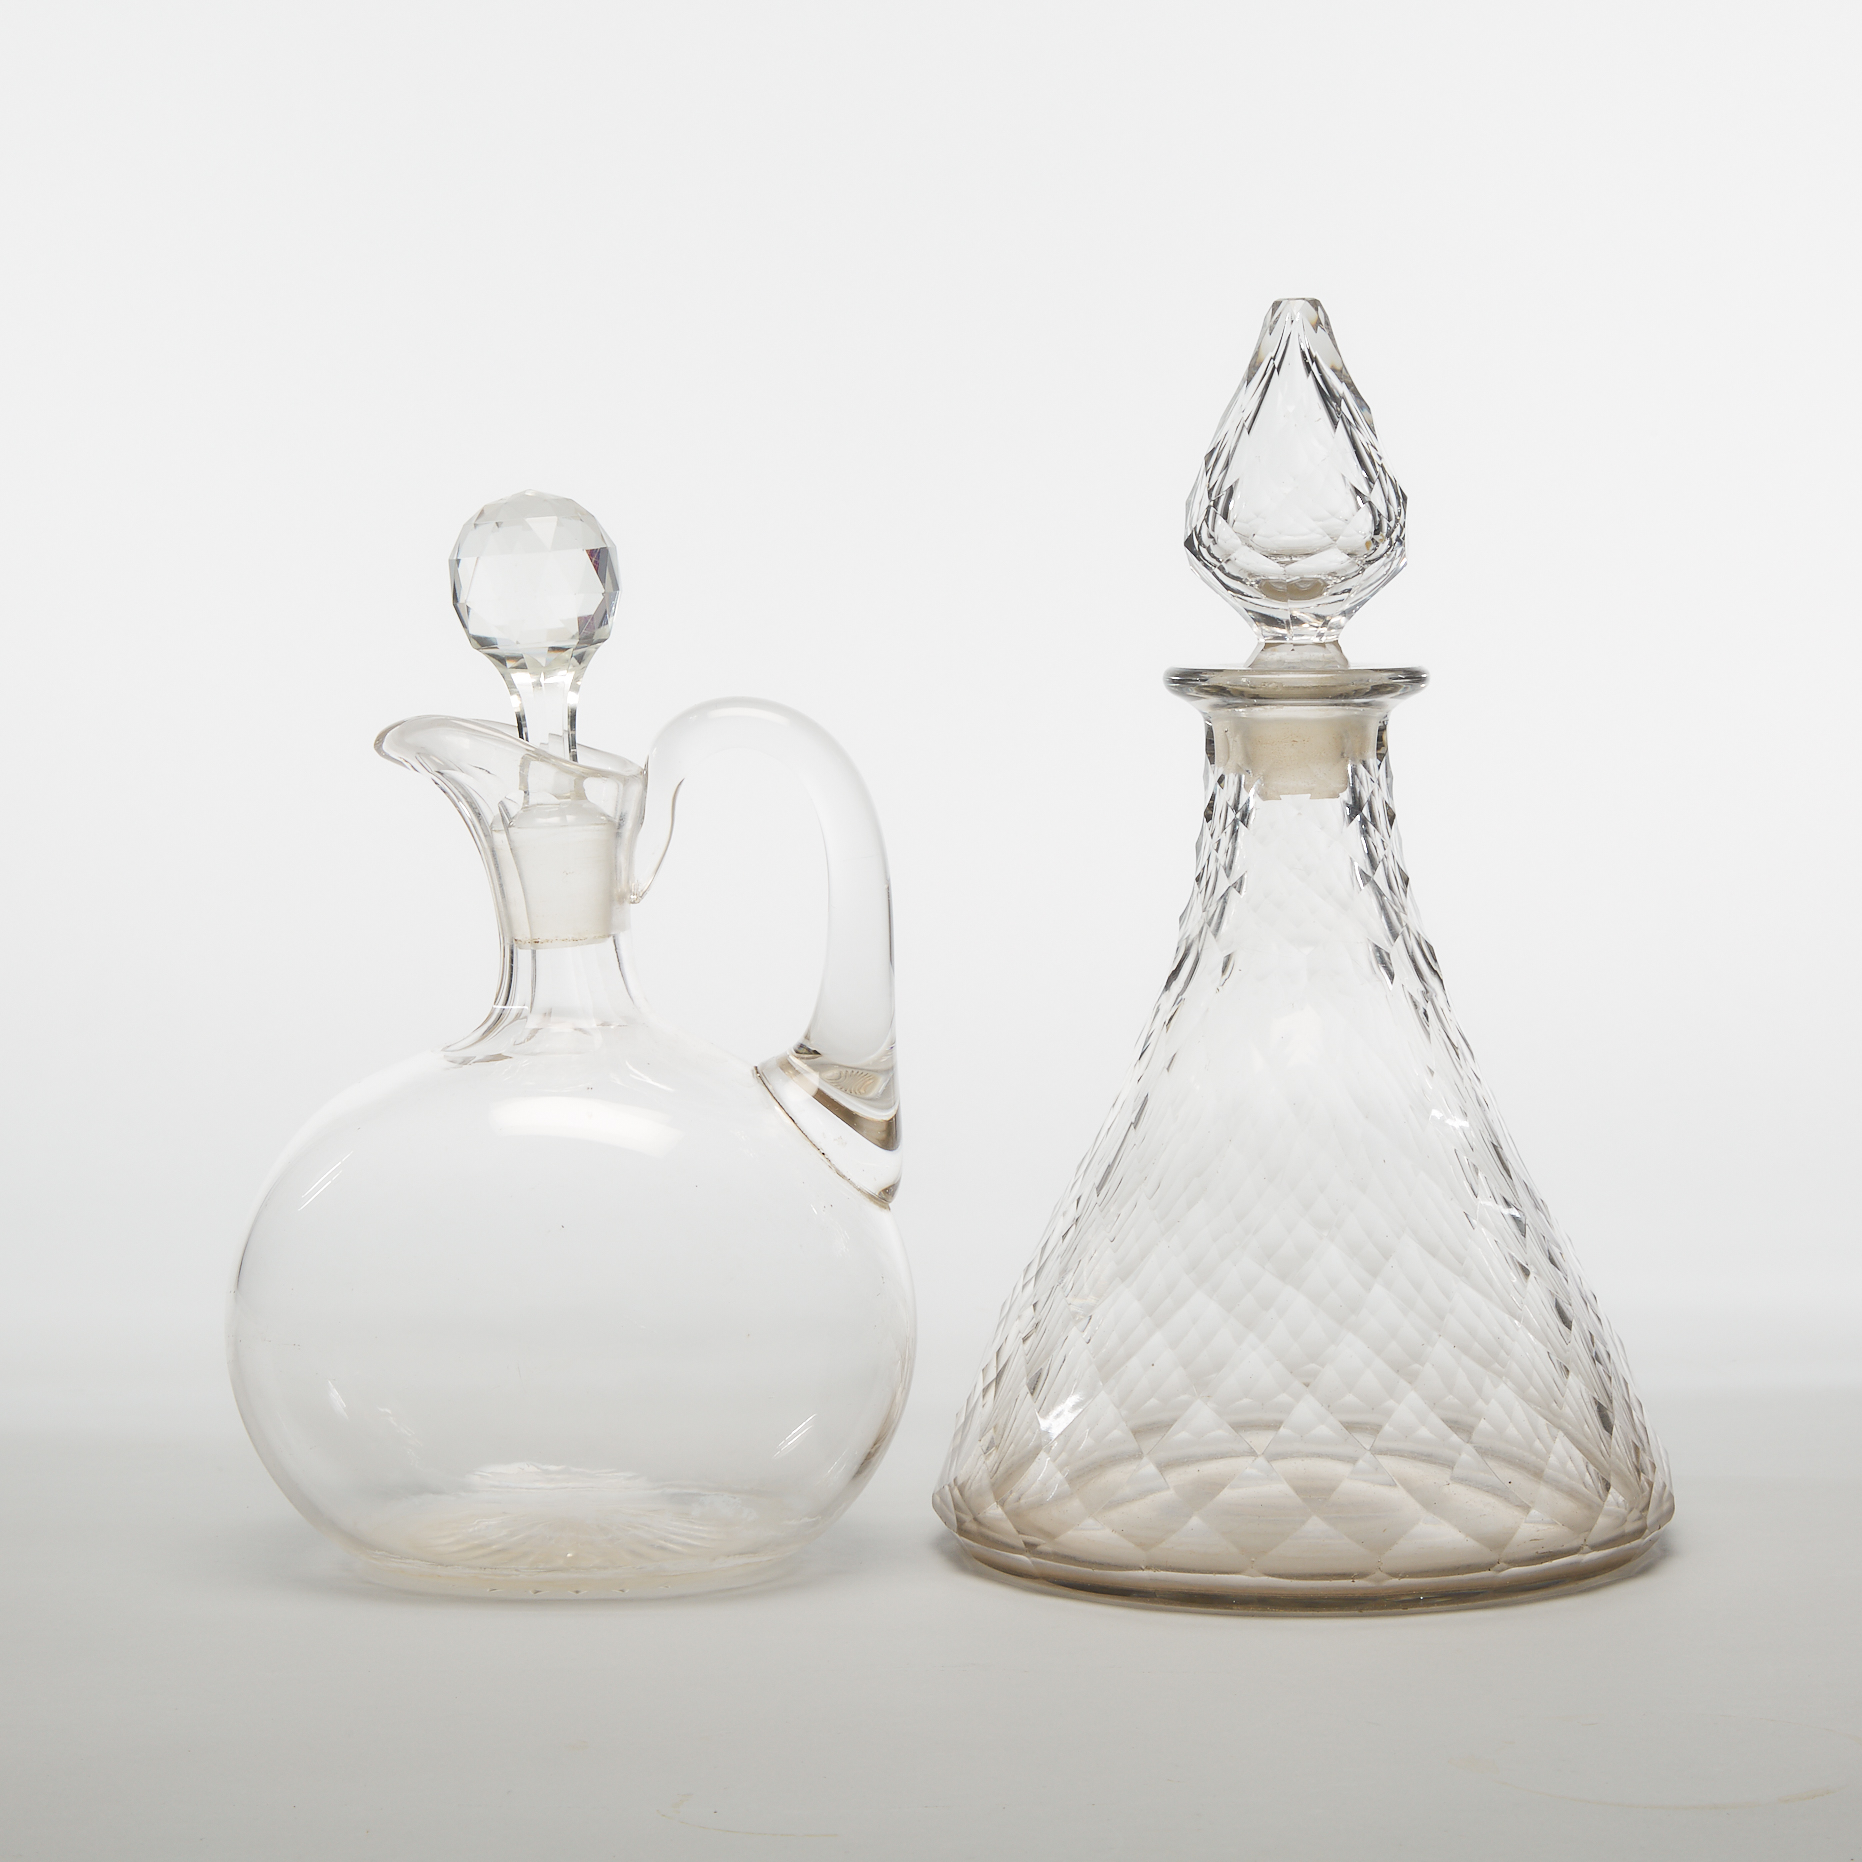 North American Cut Glass Ship's Decanter and a Carafe, late 19th/early 20th century